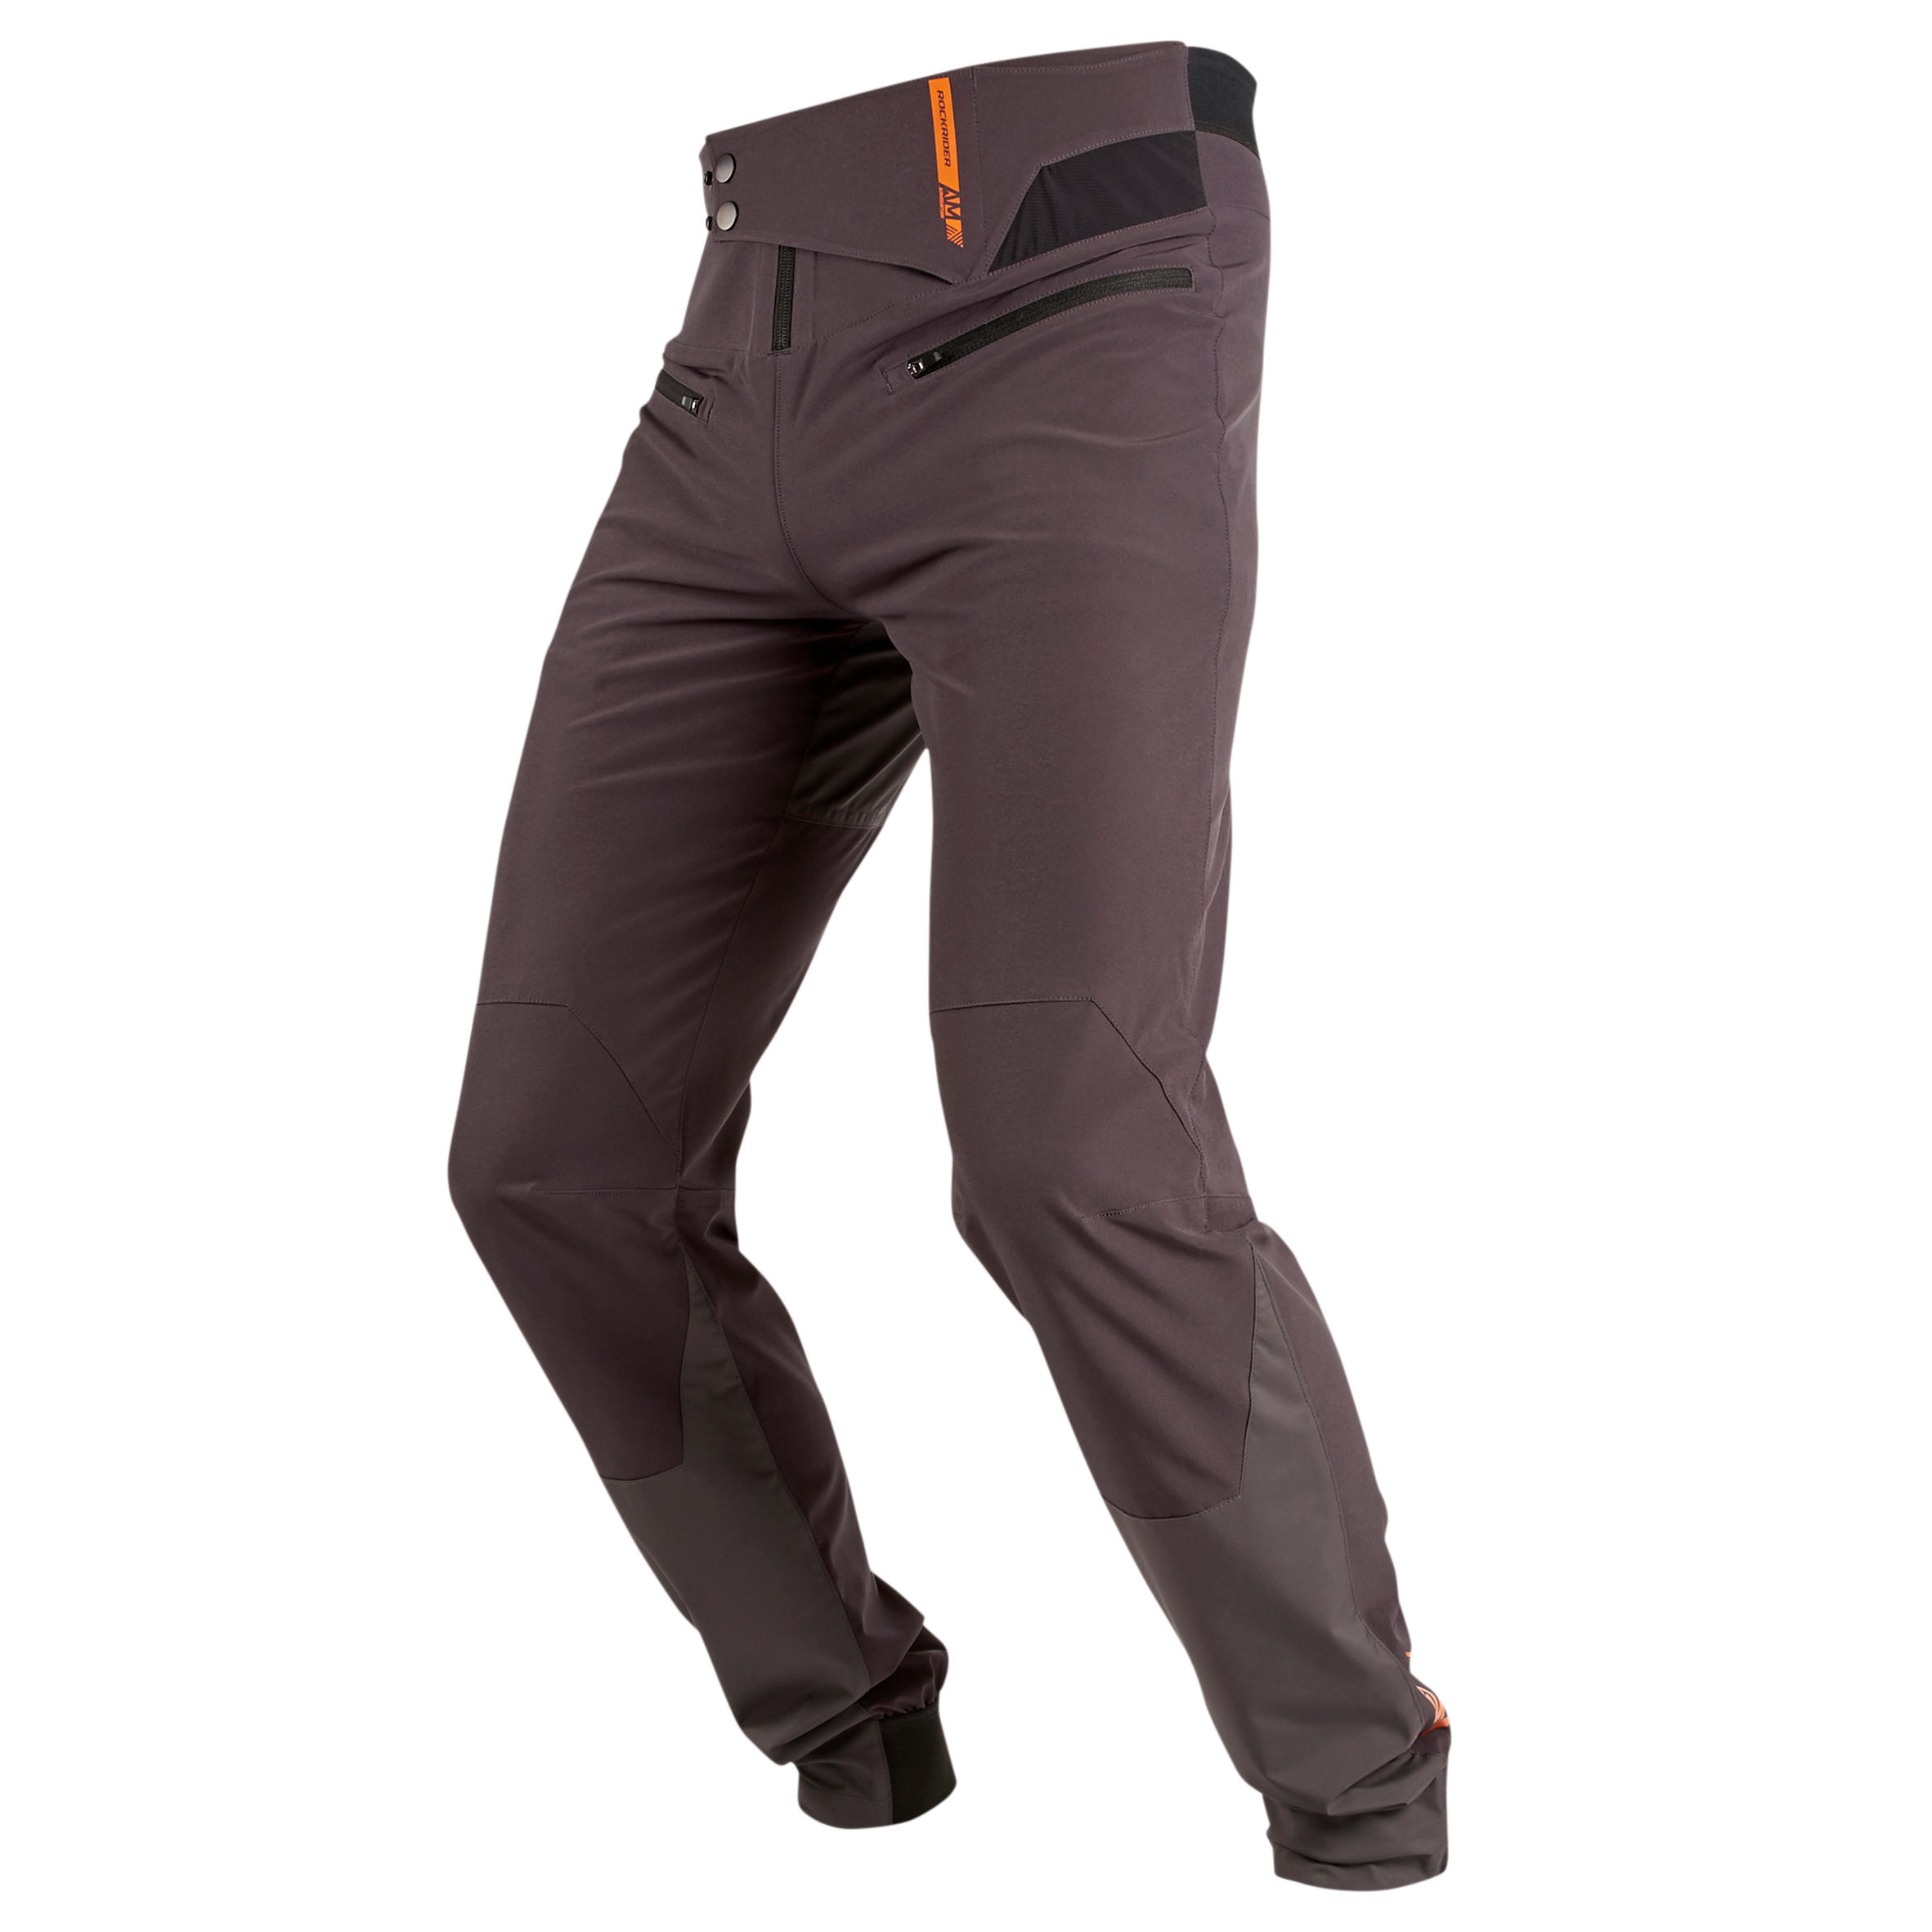 decathlon cycling trousers